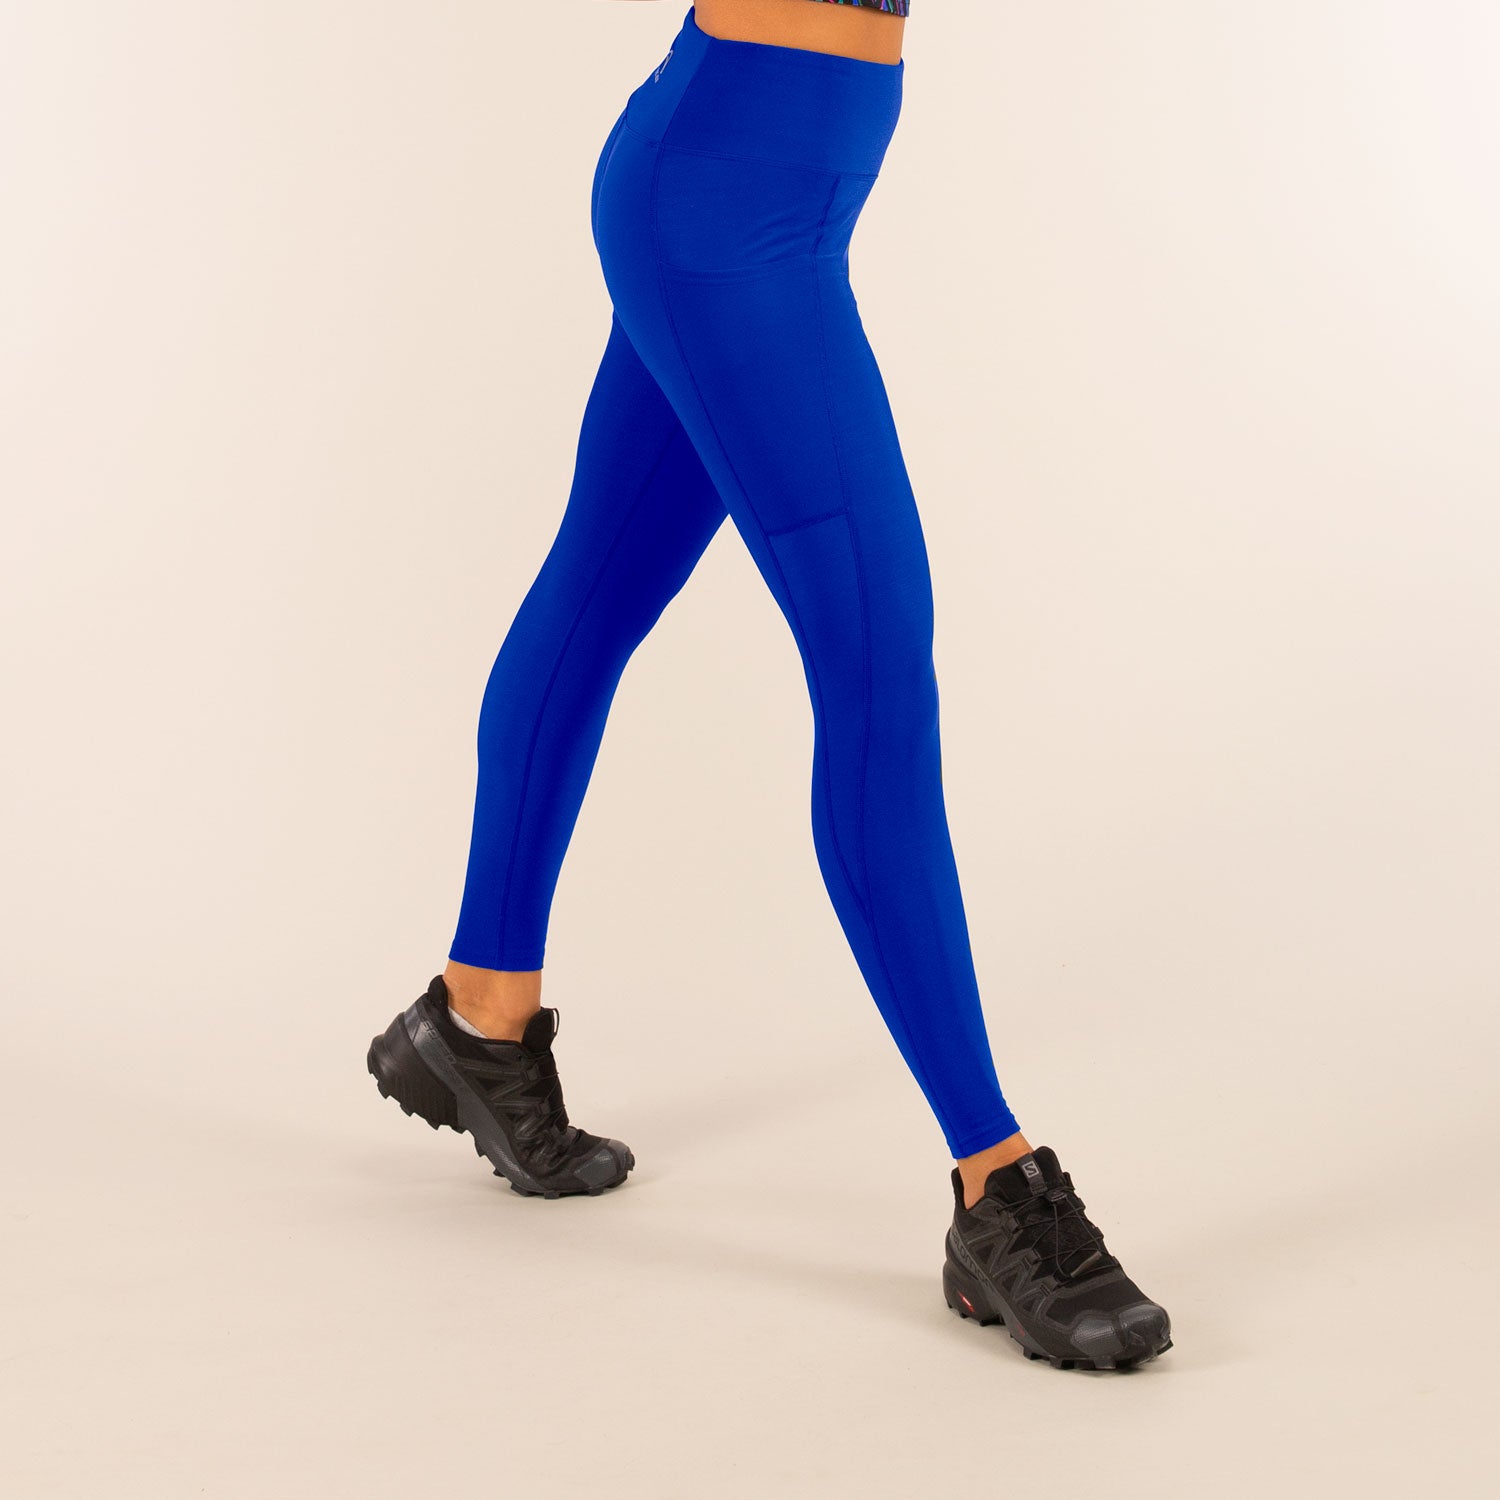 DAPHNE Leggings | Women's Thermal Daphne Leggings | 3RD ROCK Clothing -  Kendal is 5ft 7 with a 28" waist, 38" hips and wears a size 12/RL. F